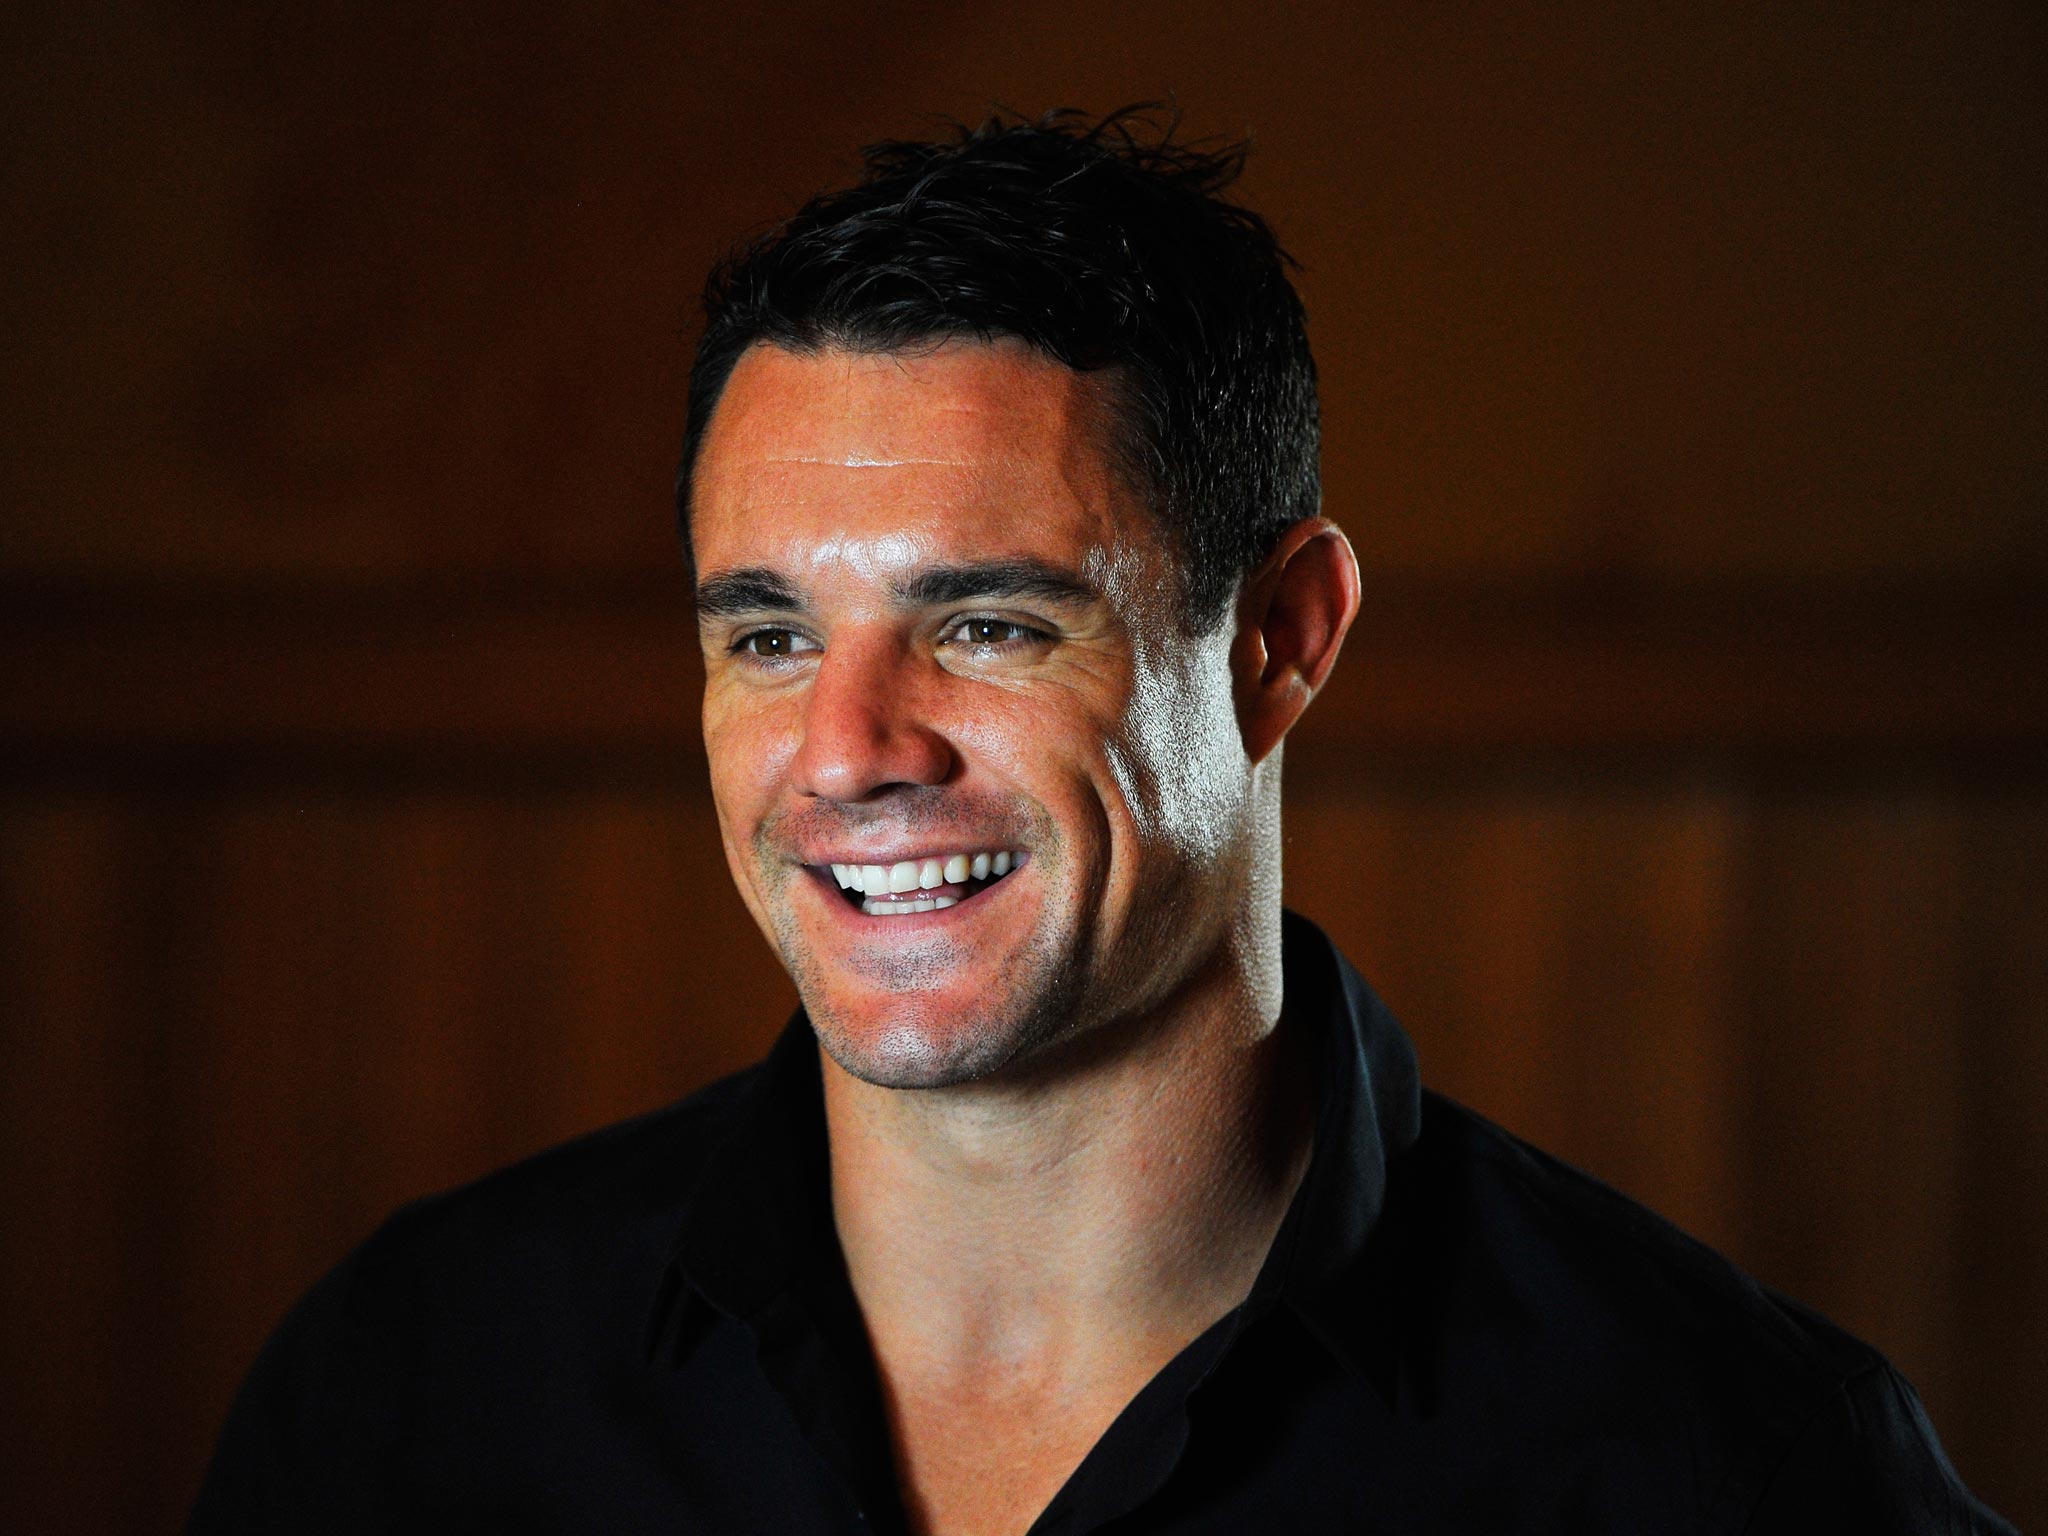 Dan Carter is determined to put his 2011 World Cup final heartache behind him by succeeding in 2015